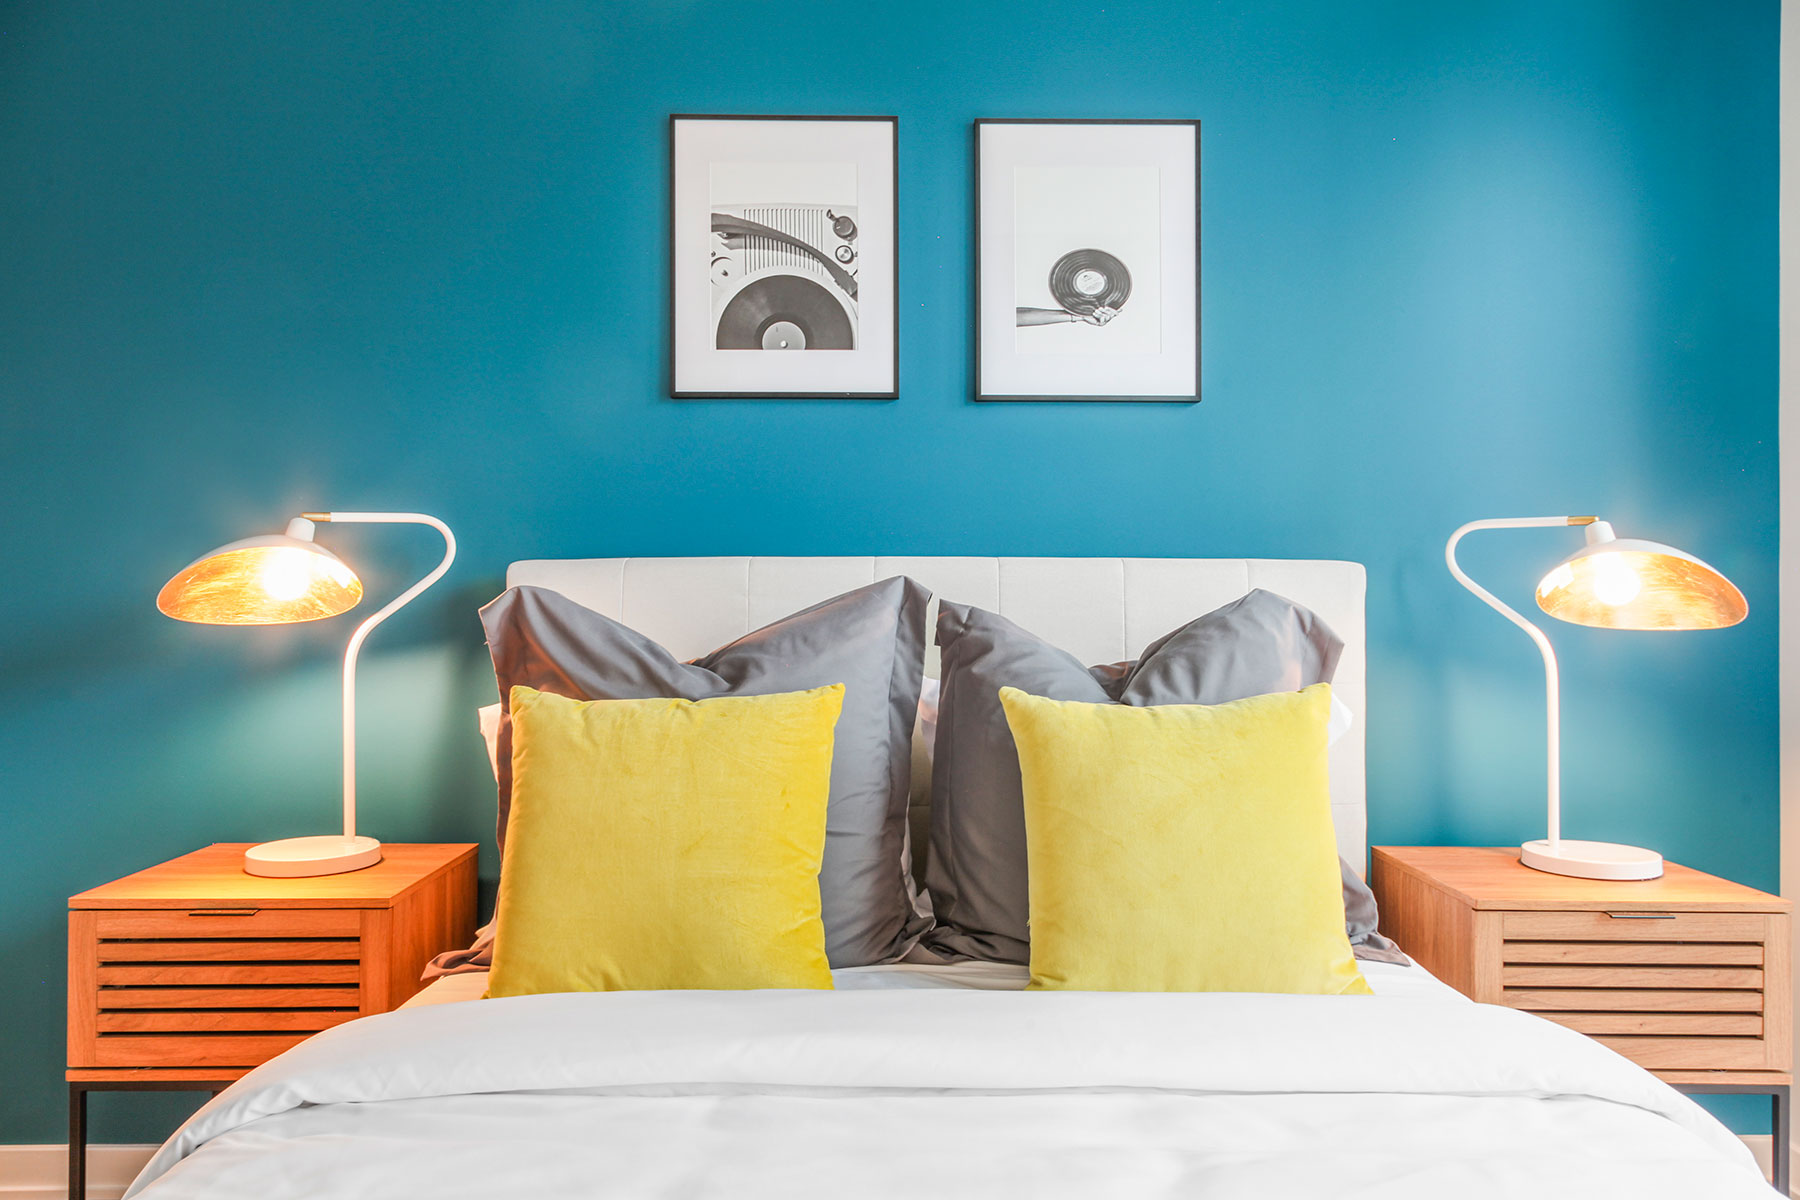 Detail of bed with modern bedding, accent pillows, fabric headboard, teal accent wall with framed art, matching wood and metal nighstands with lamps on each side